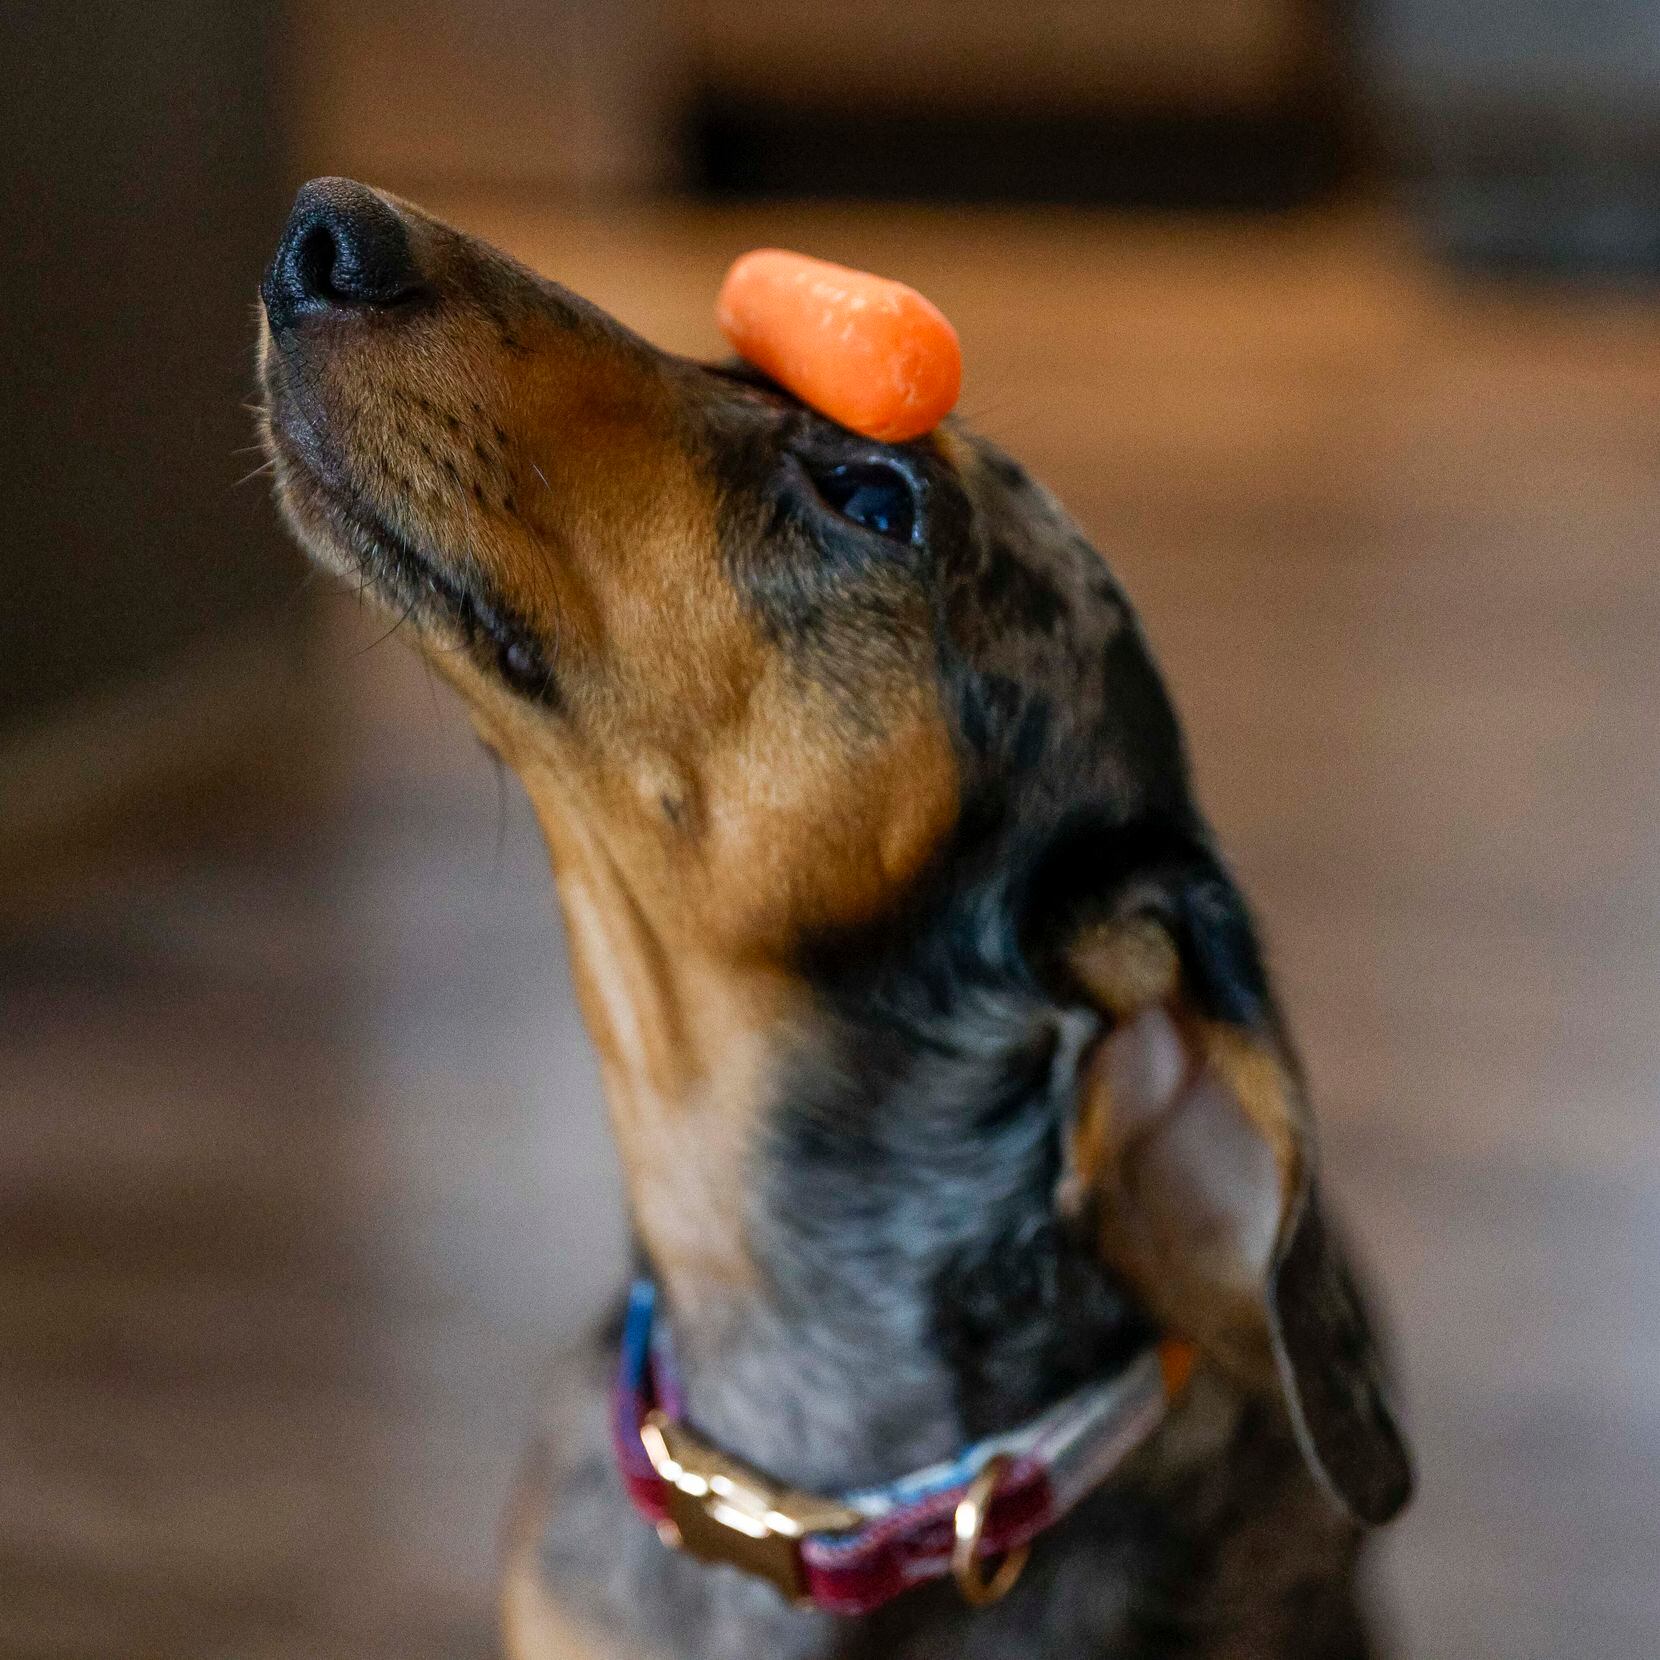 Alison Roche’s dog Winston balances a carrot on his head before eating it at her apartment...